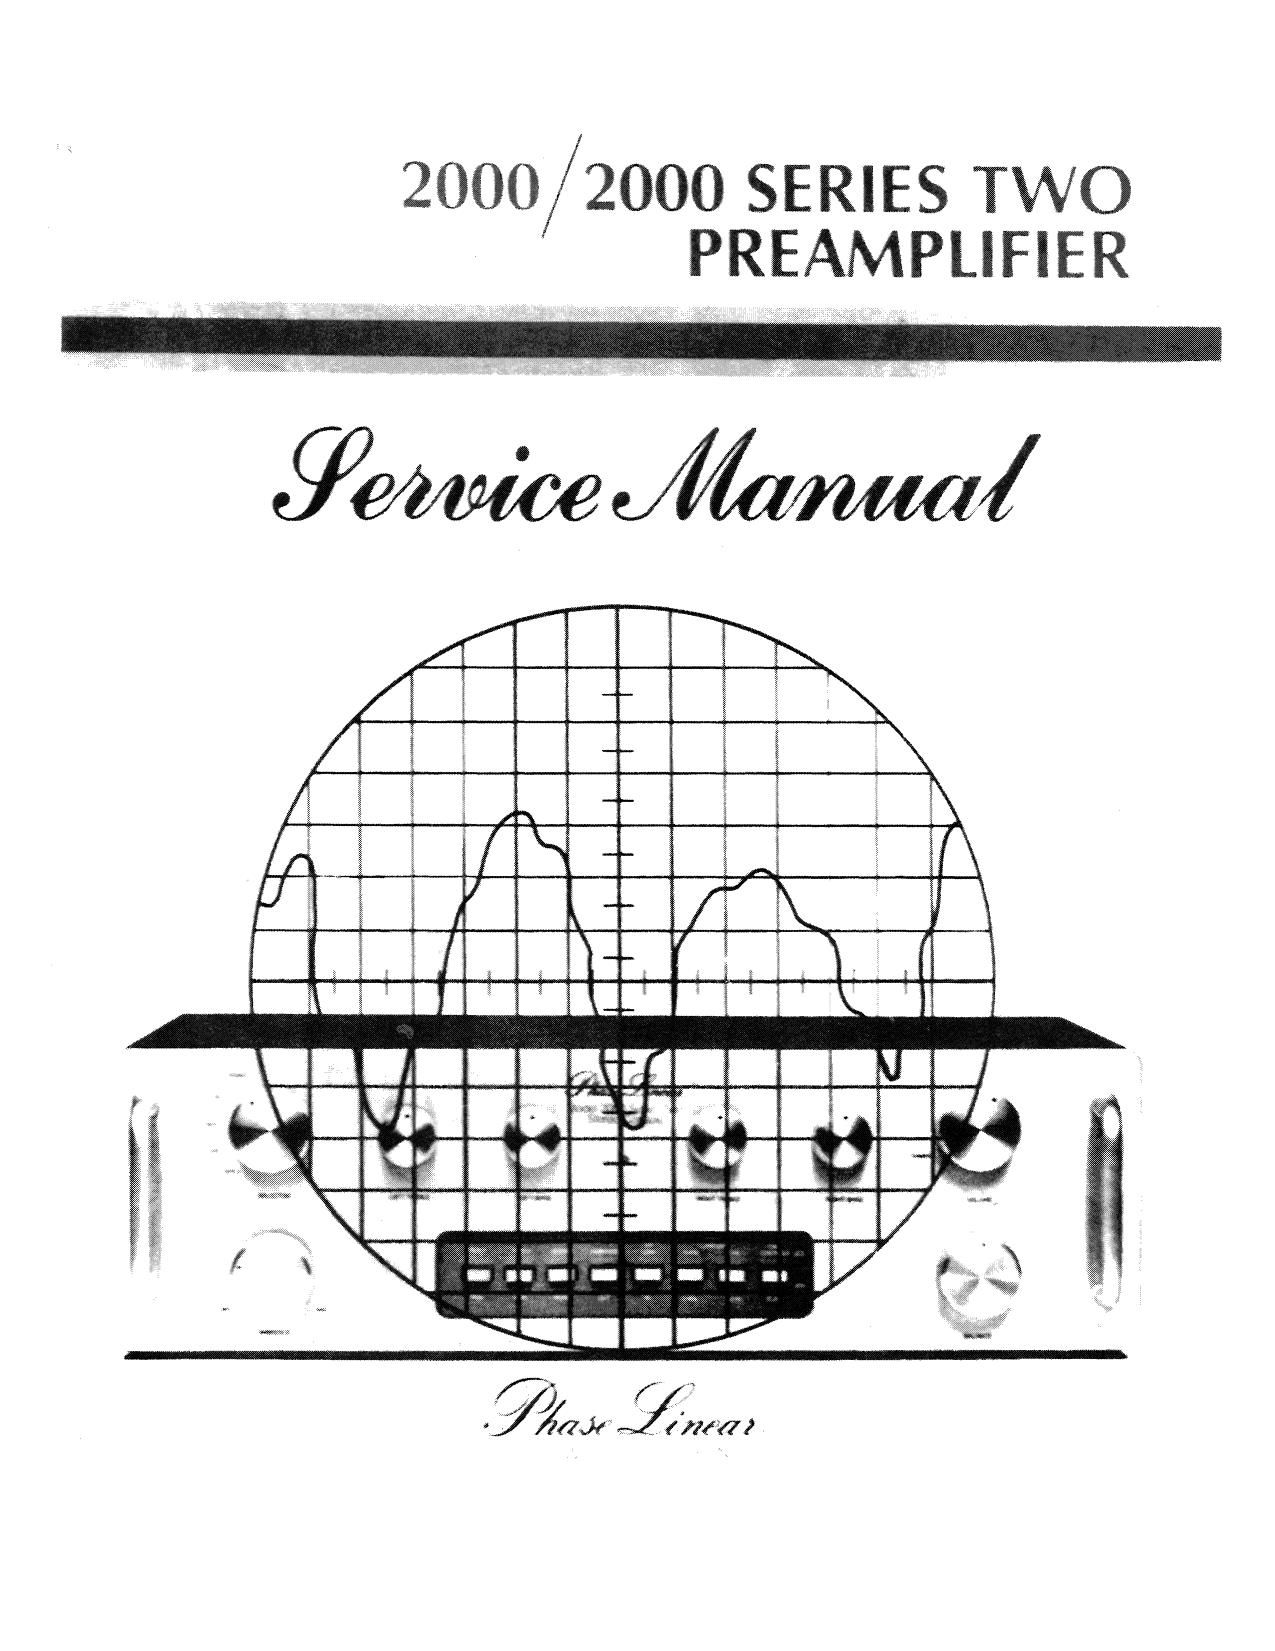 Phase Linear 2000 S2 Service Manual